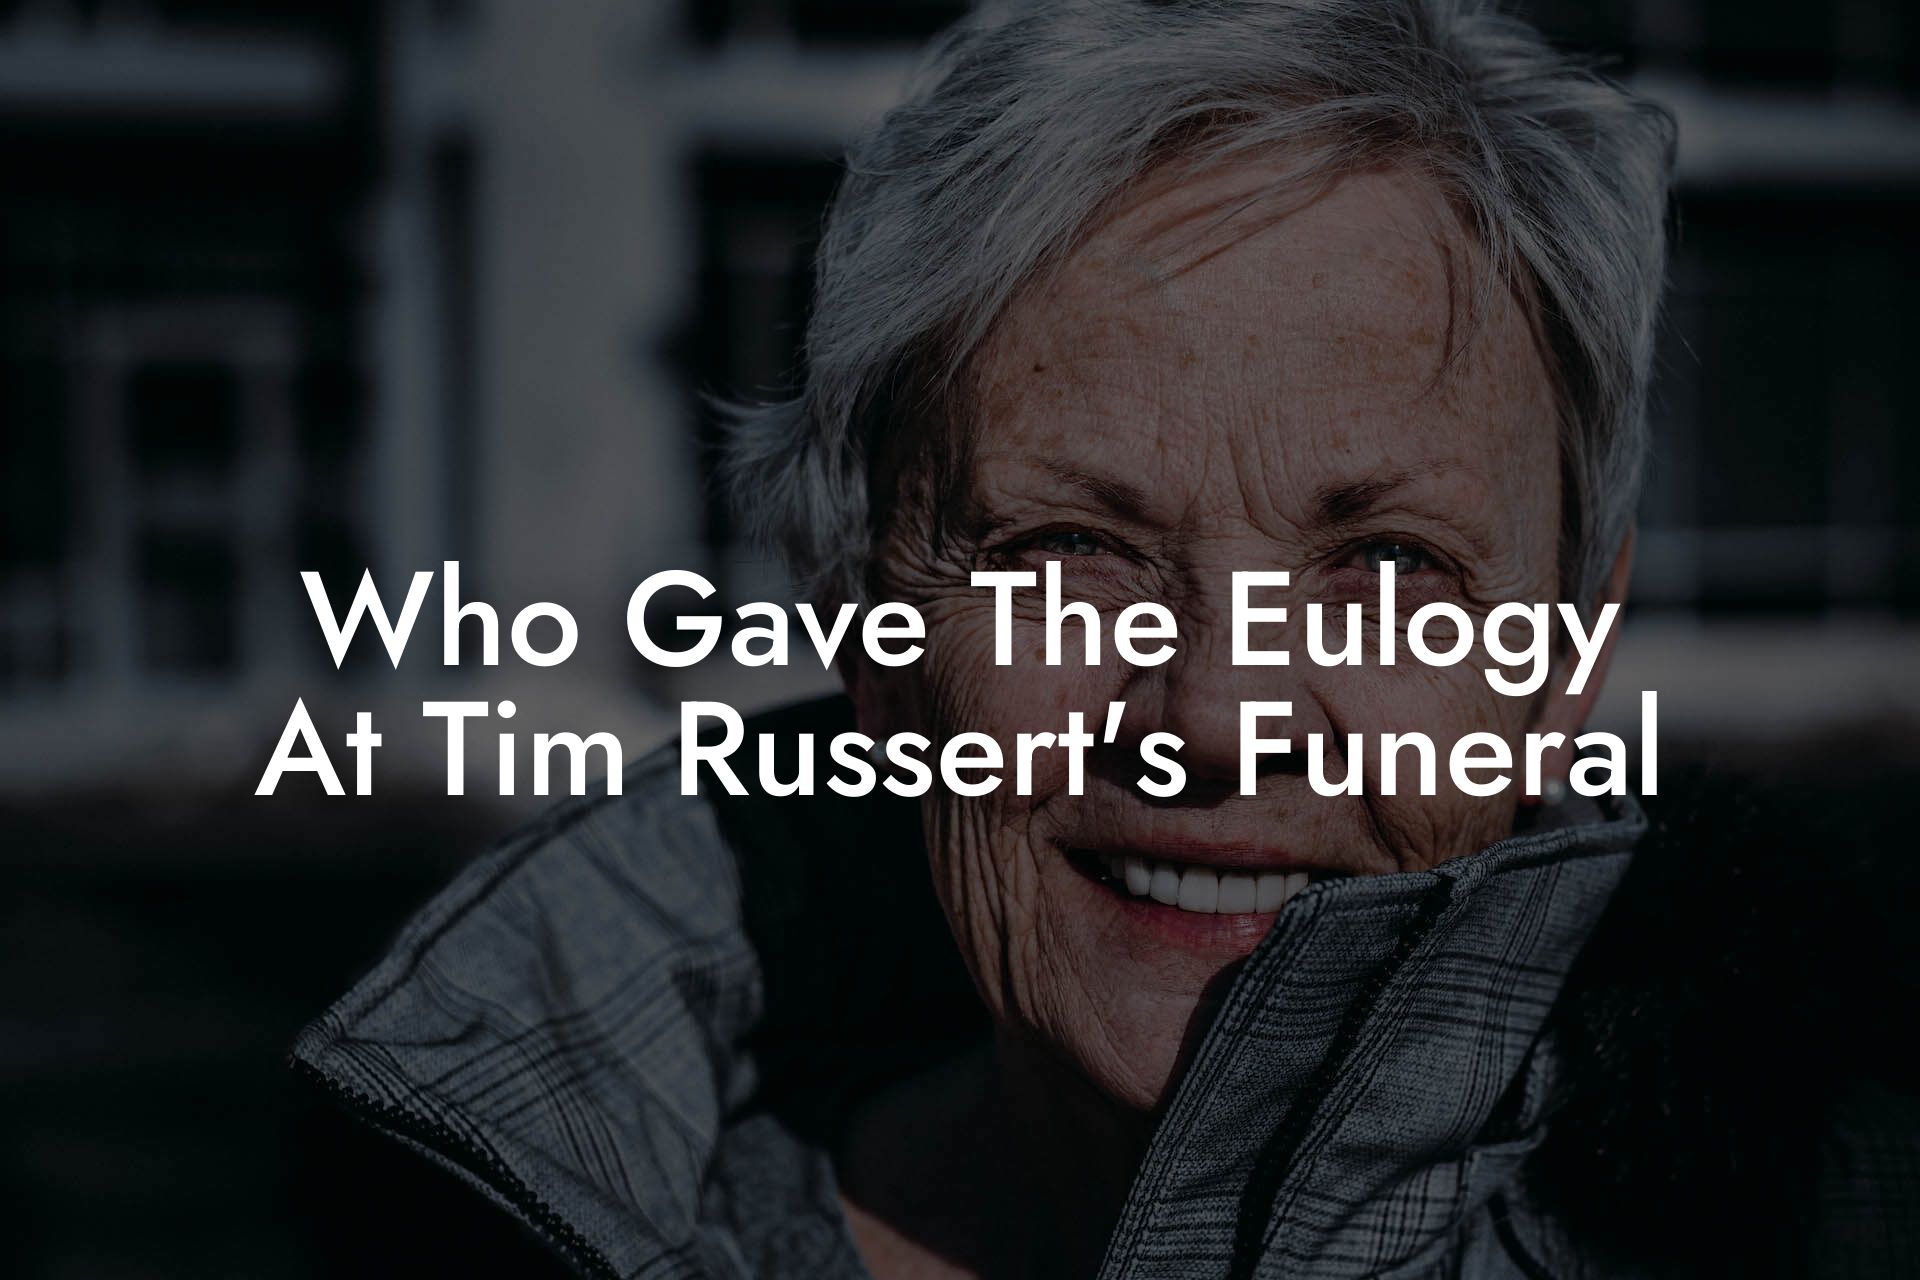 Who Gave The Eulogy At Tim Russert's Funeral - Eulogy Assistant